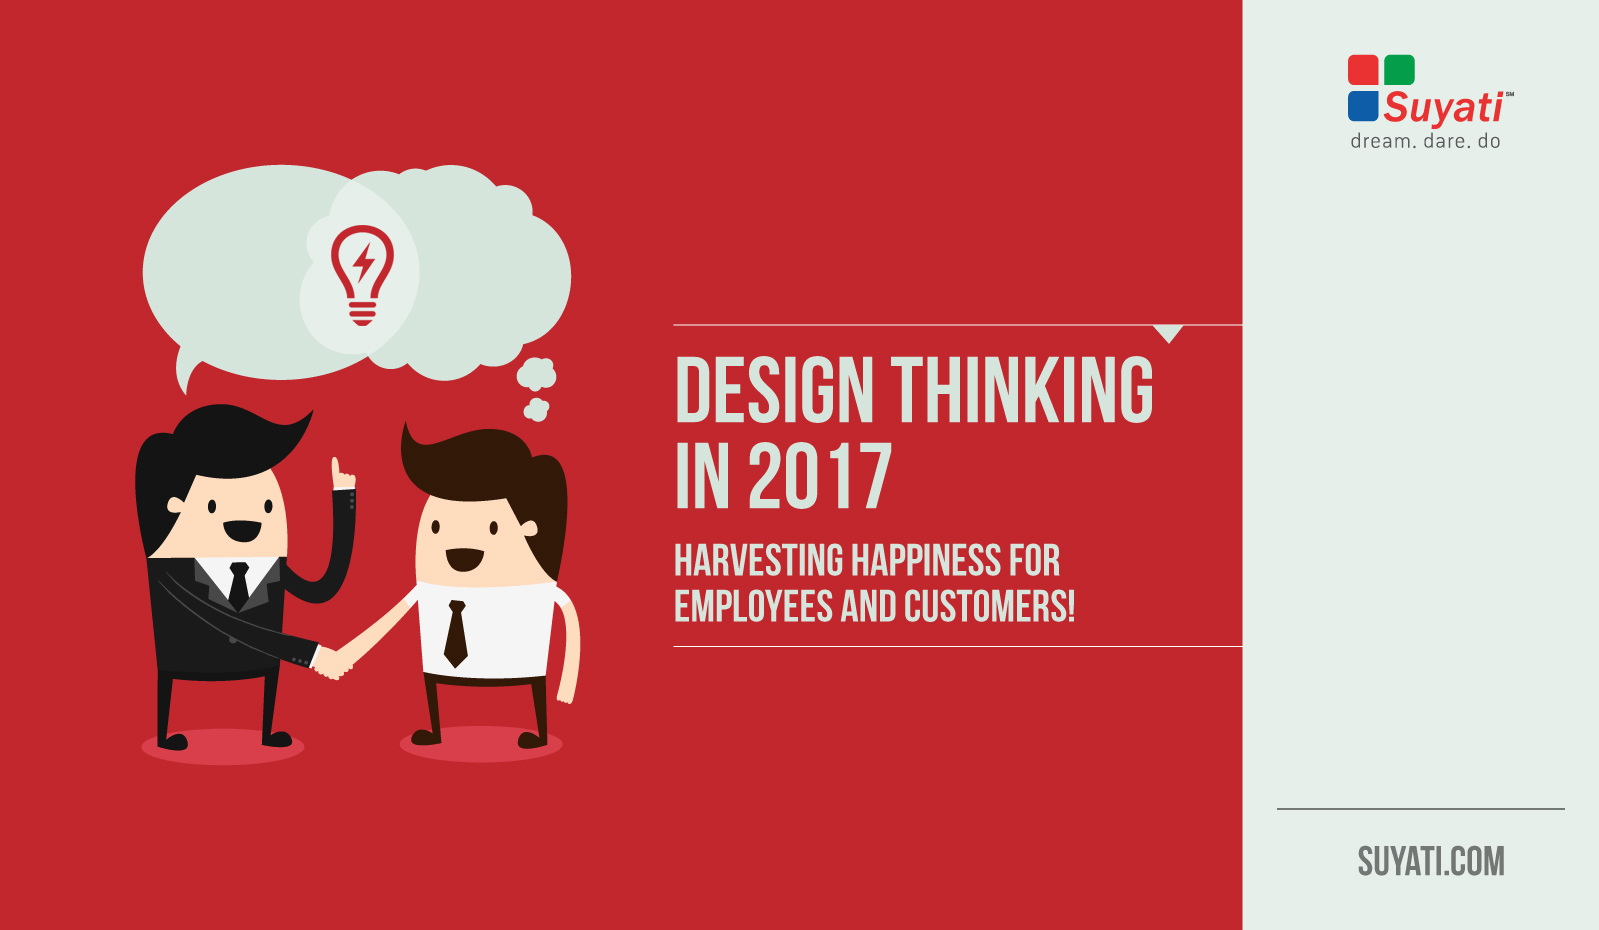 Design Thinking What does 2017 have in store for enterprises